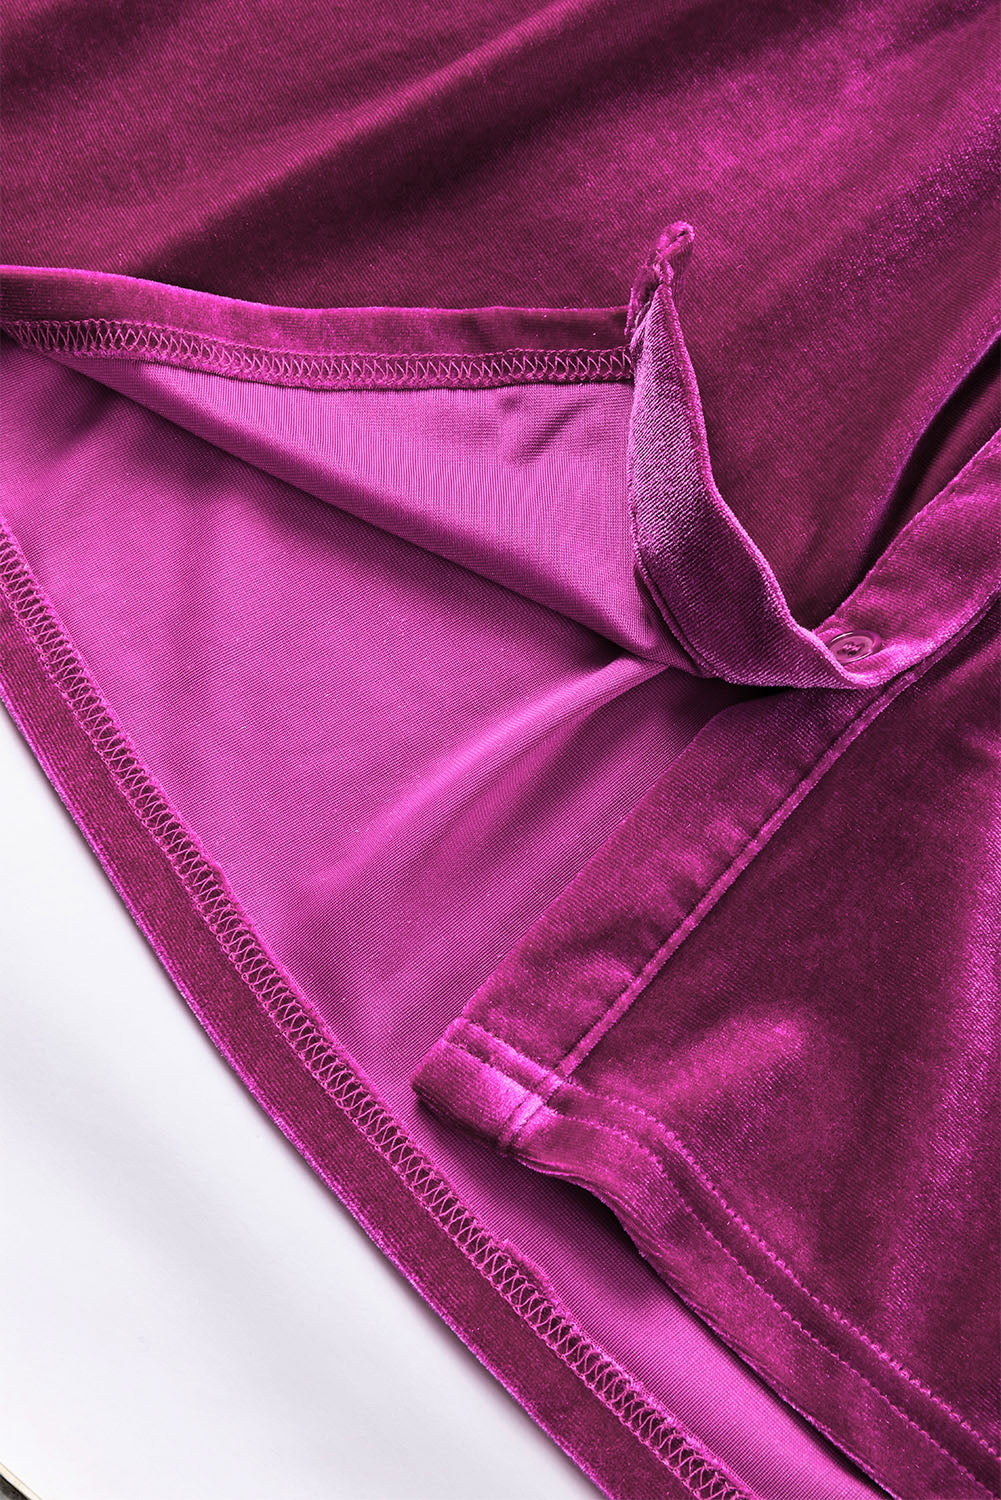 a close up of a purple cloth on a white surface